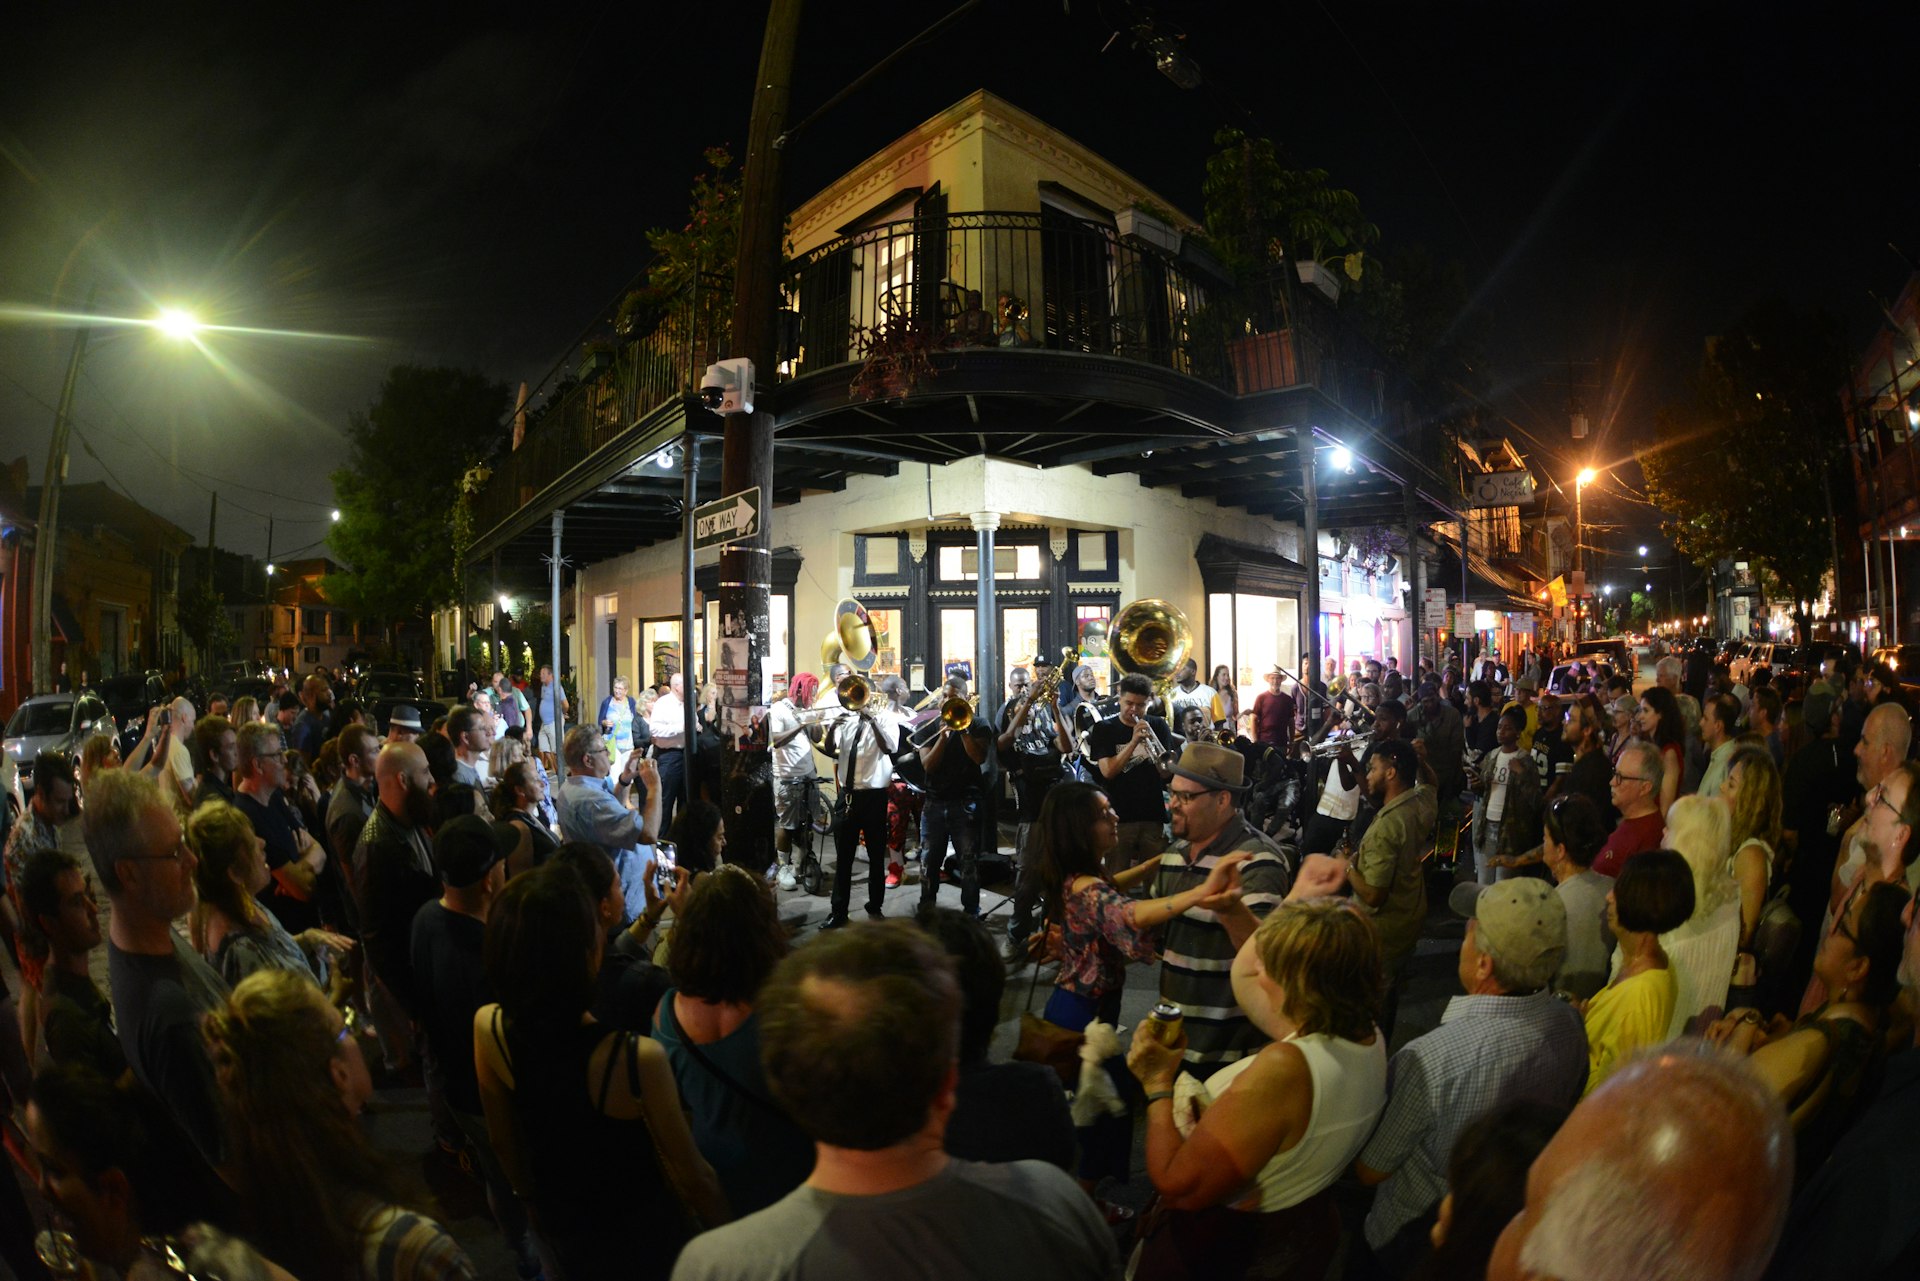 A local brass band plays on a street corner at Frenchmen Street, New Orleans, Louisiana, USA